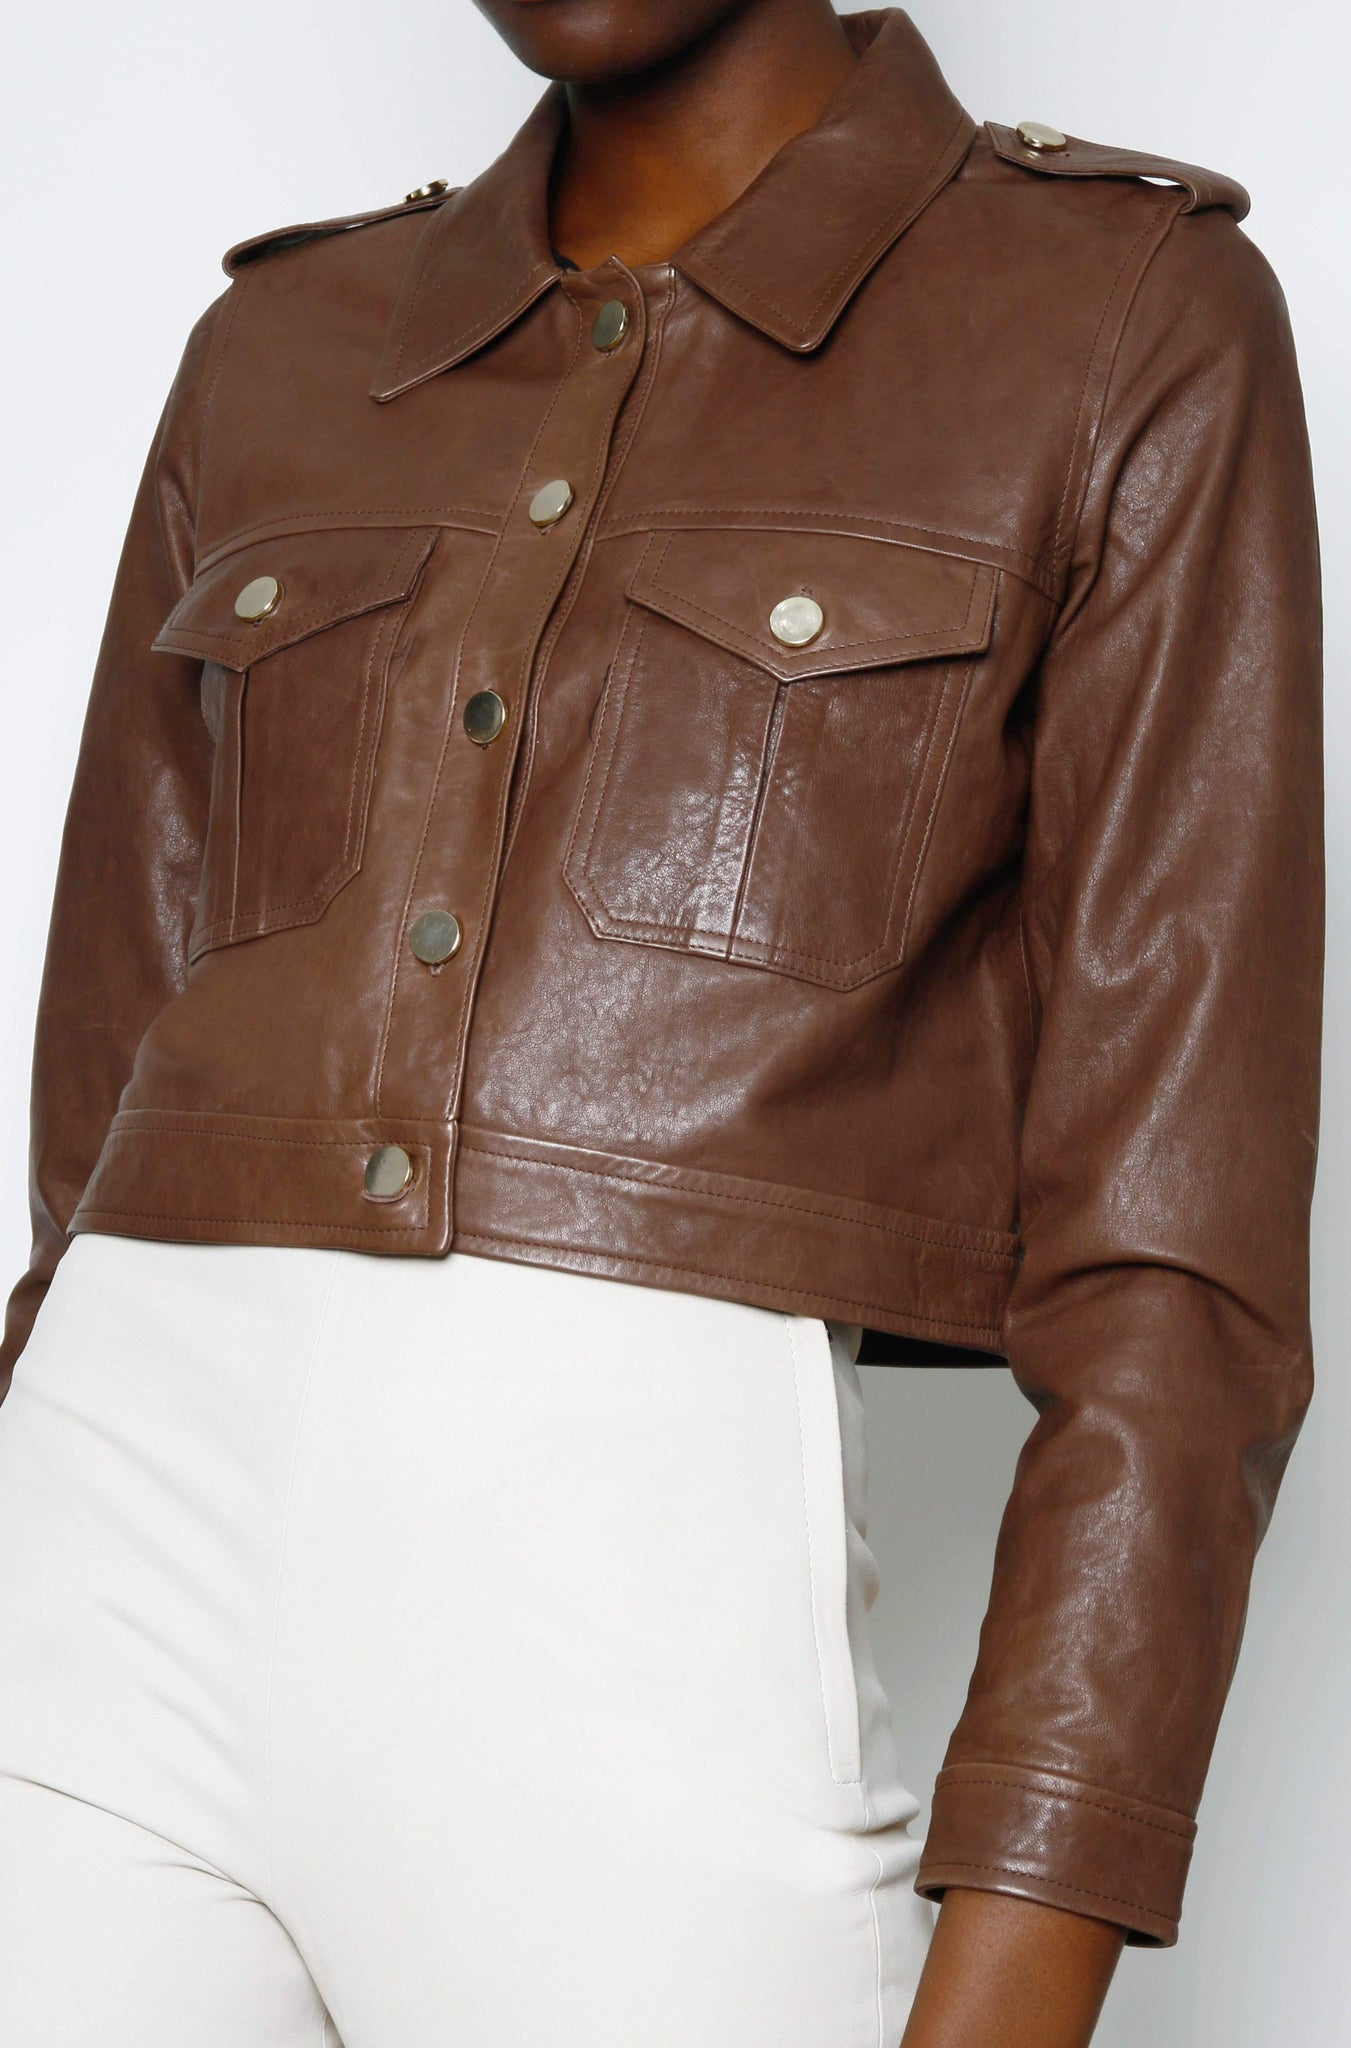 Amelie CROPPED LEATHER JACKET - TOBACCO